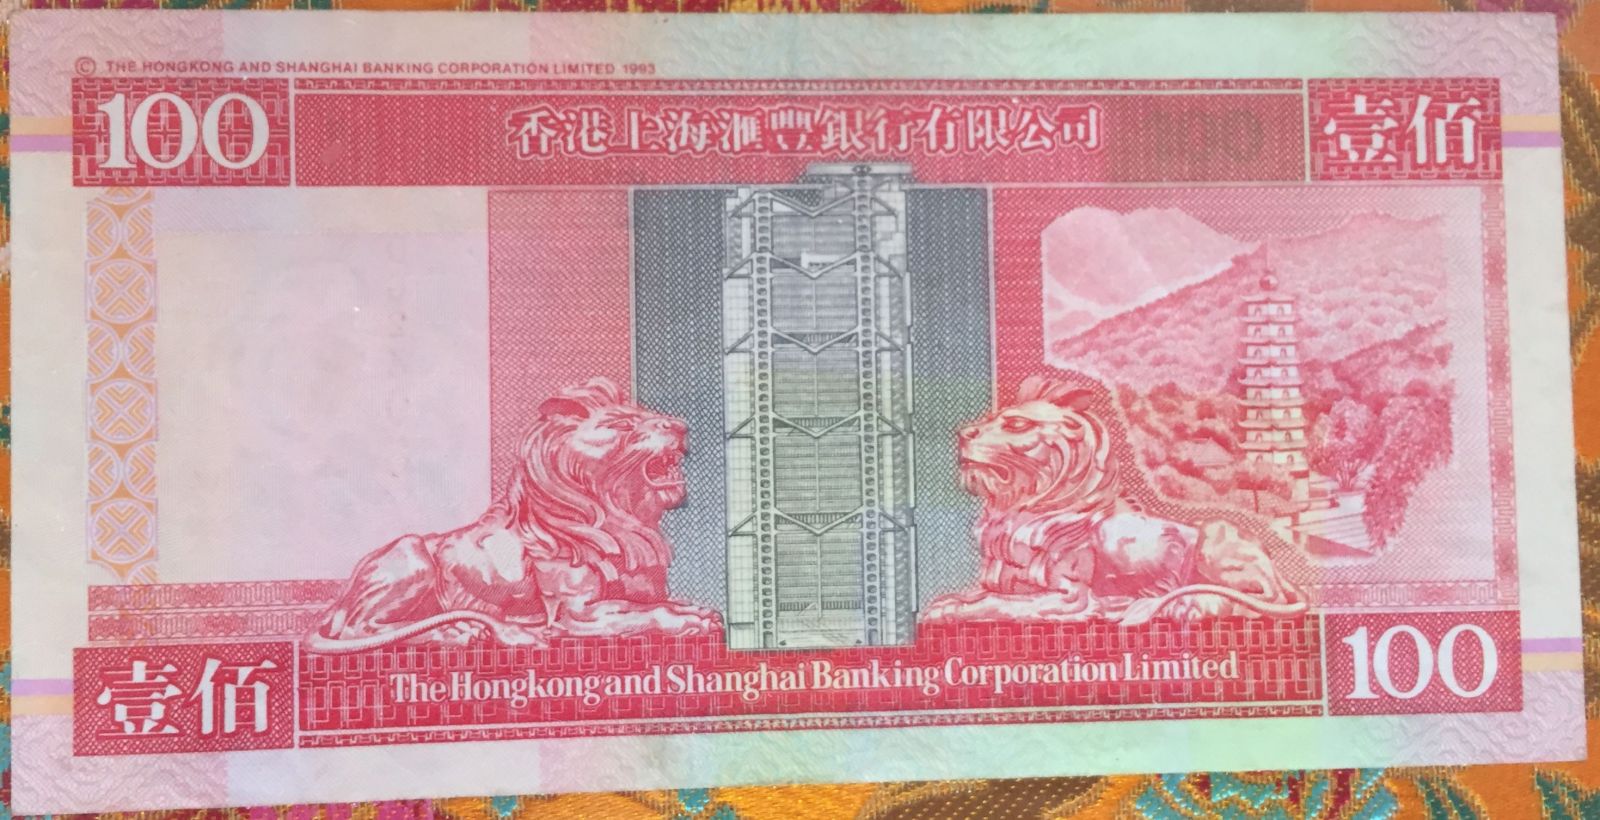 1993 version of the HSBC note (Pagoda on the right)